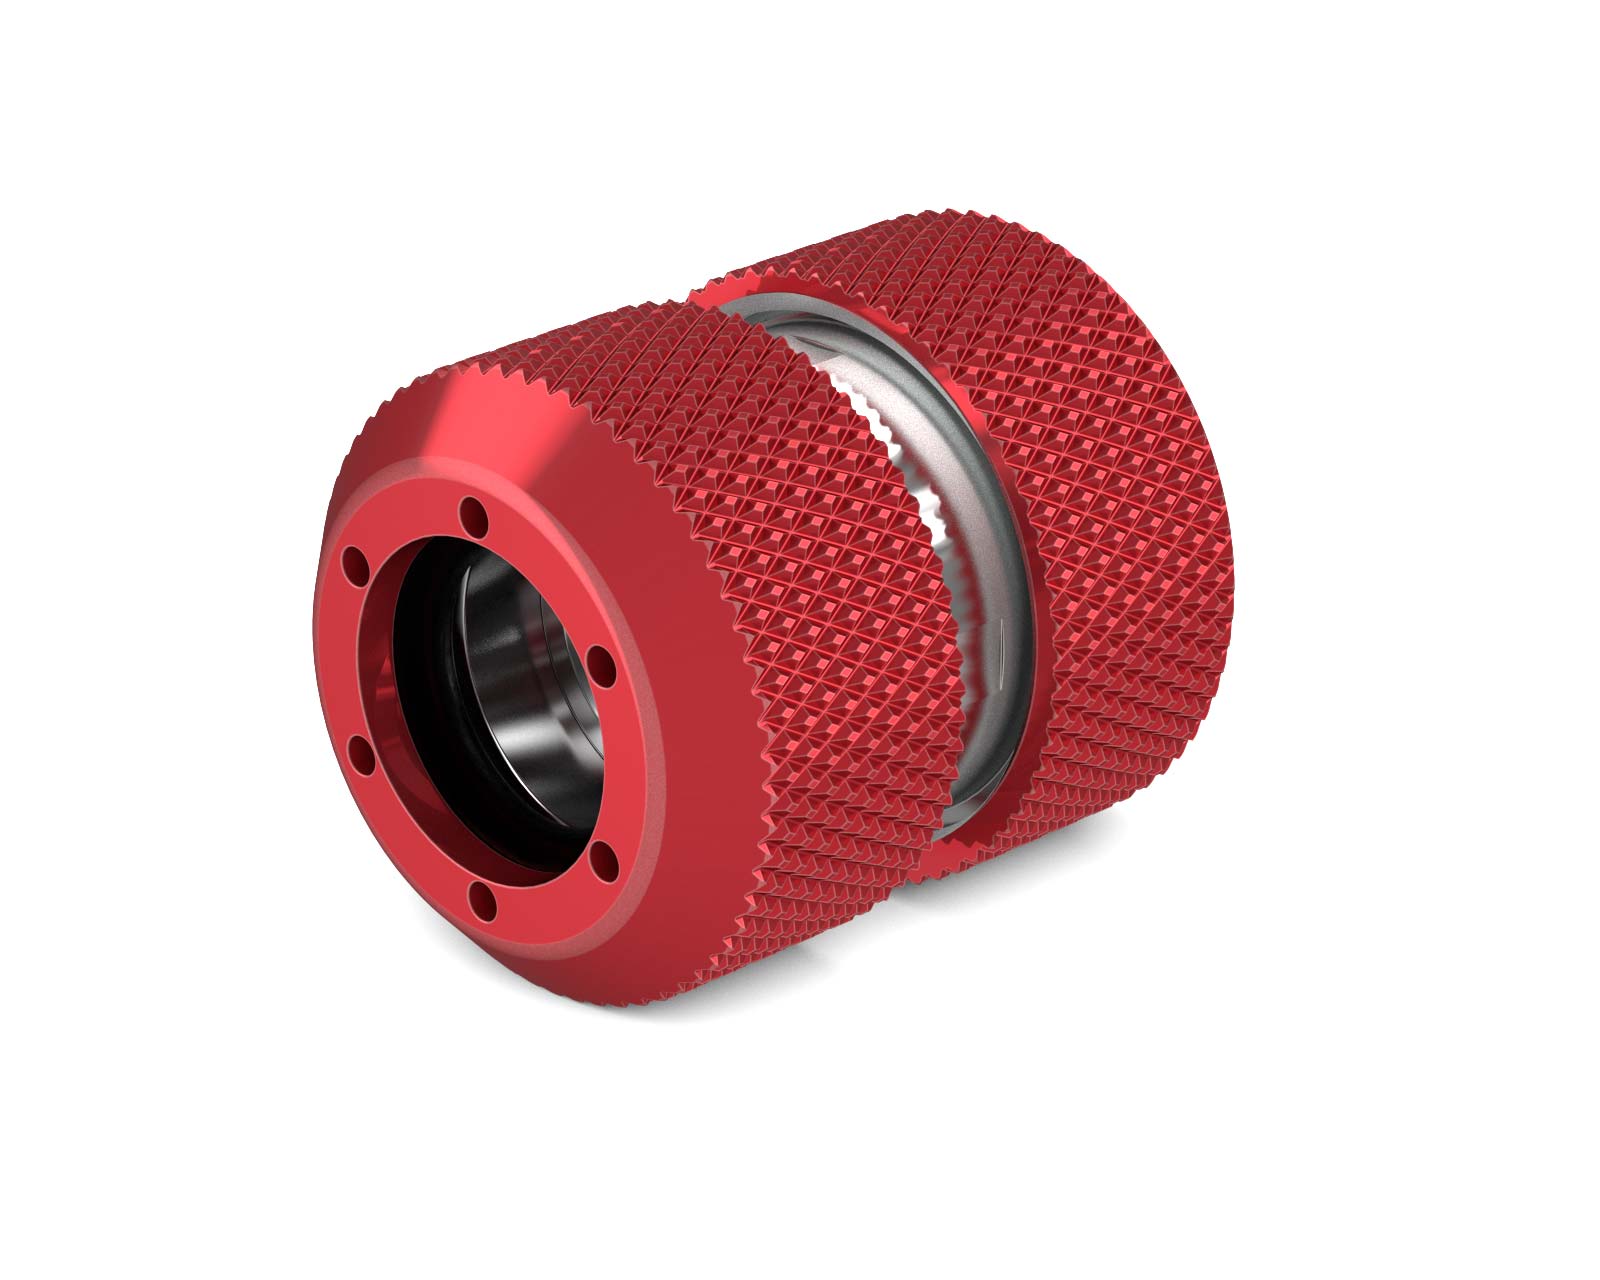 PrimoChill 1/2in. Rigid RevolverSX Series Coupler Fitting - PrimoChill - KEEPING IT COOL Candy Red